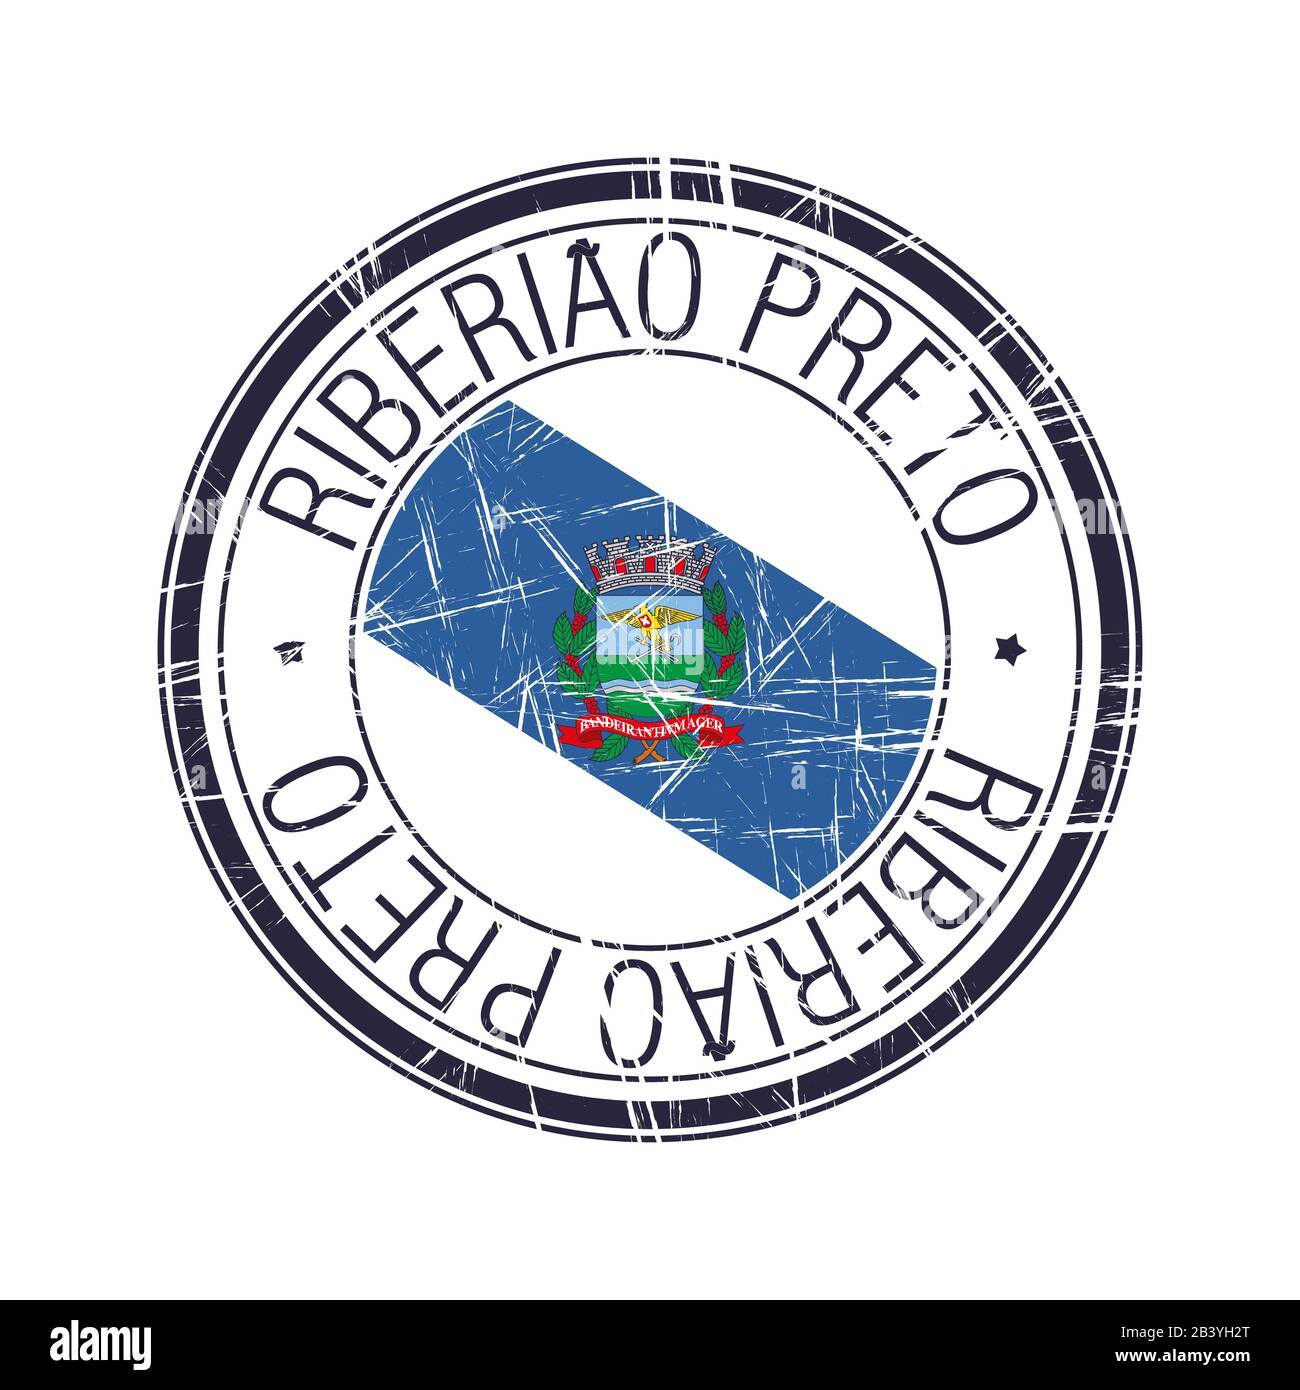 City of Ribeirao Preto, Brazil postal rubber stamp, vector object over white background Stock Vector